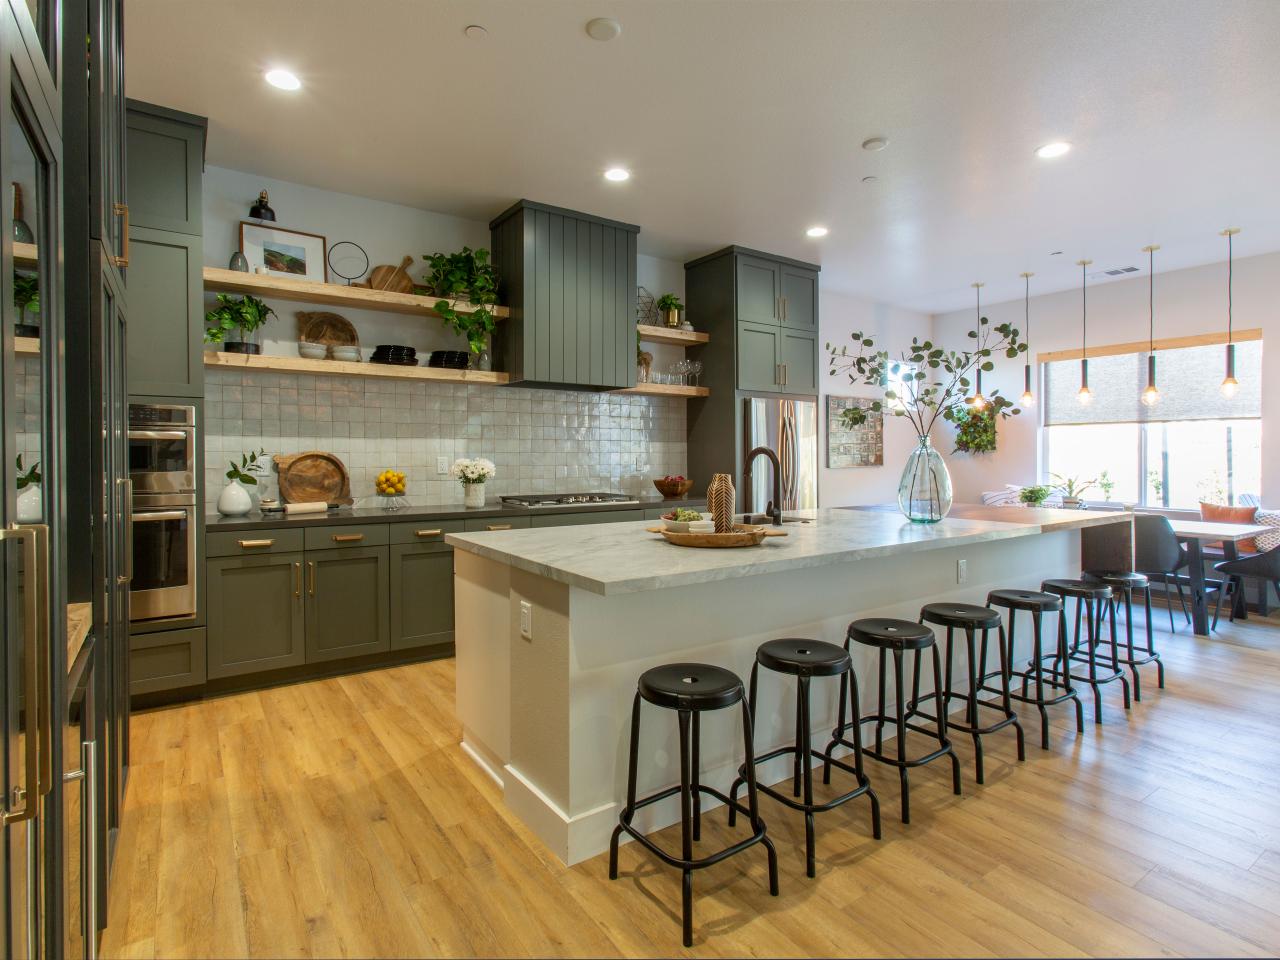 How to Choose Kitchen Cabinet Paint Colors